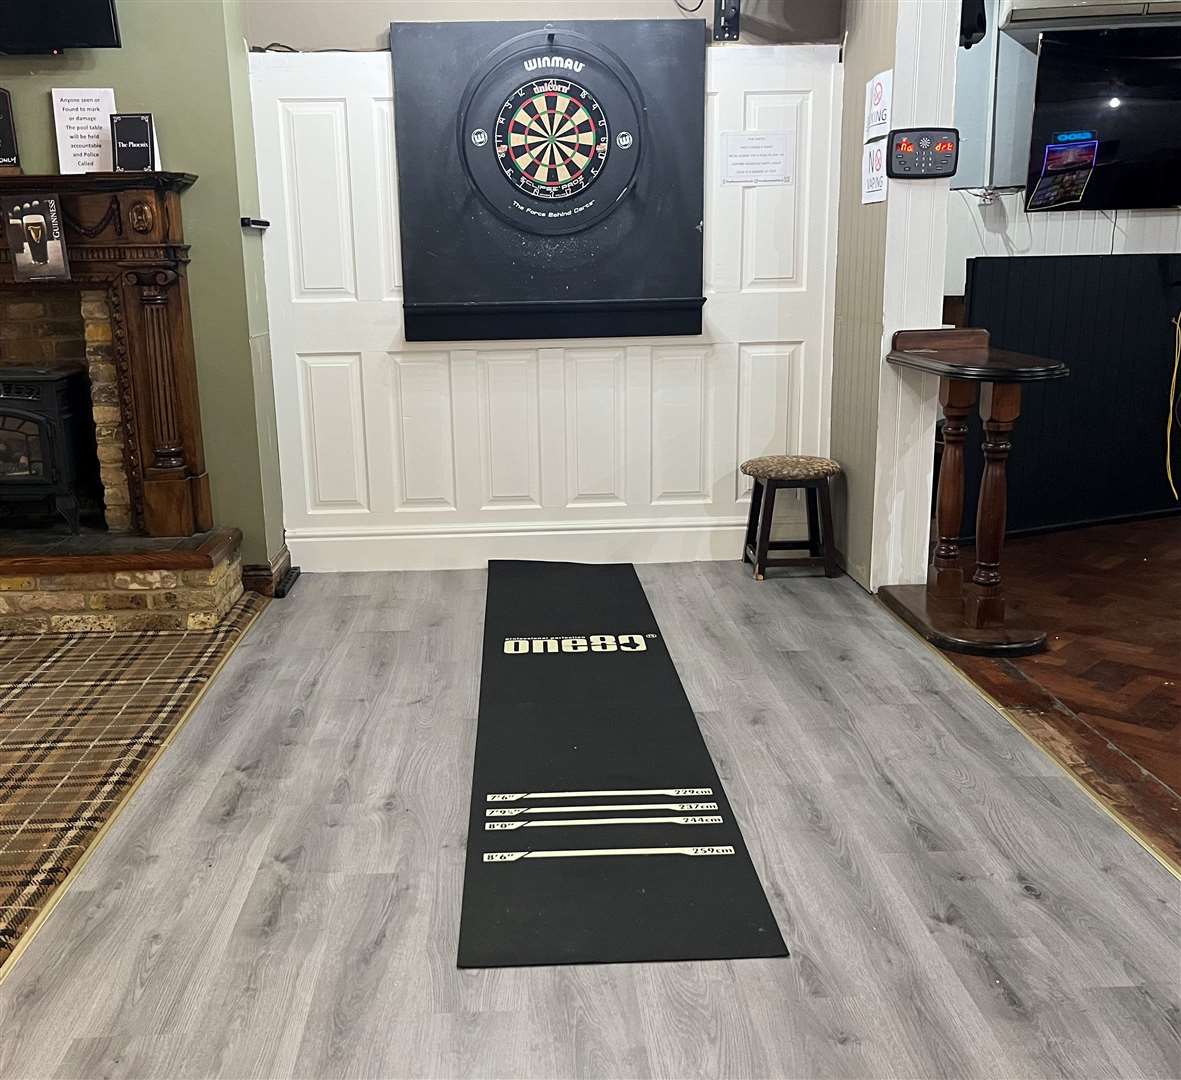 The new darts area installed at The Phoenix in Ashford